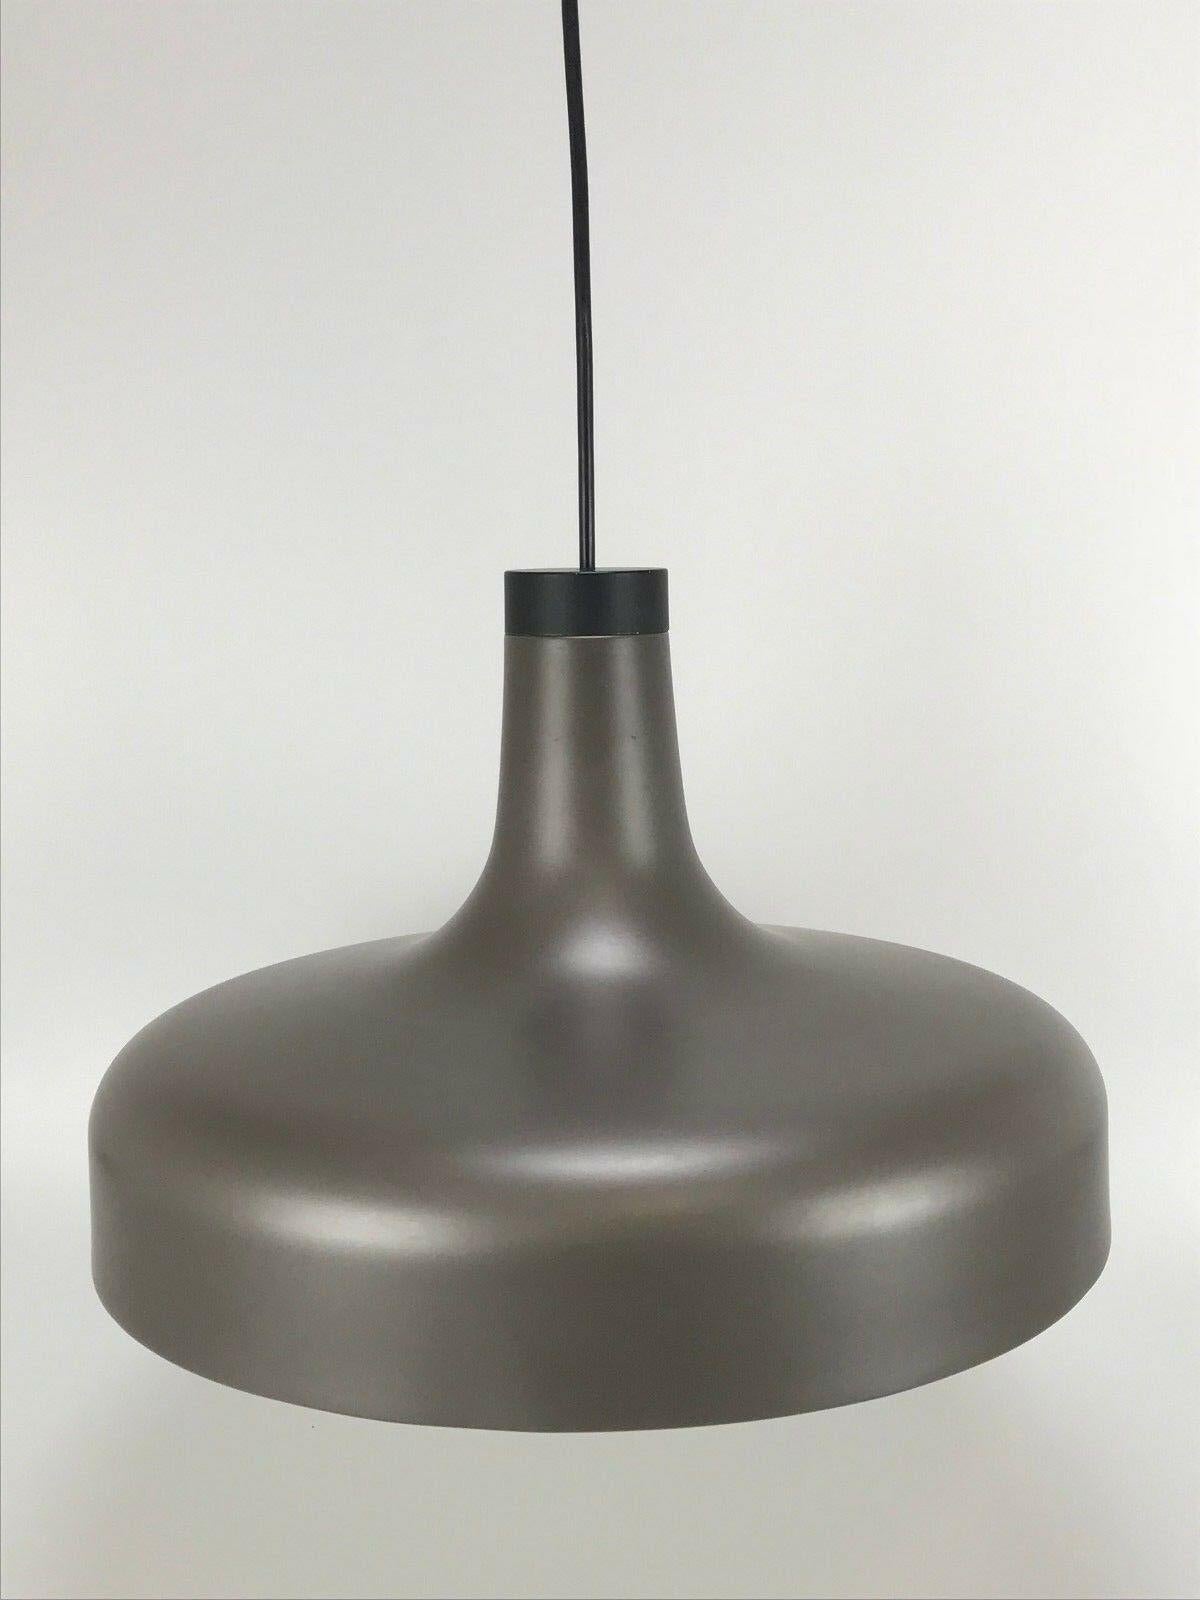 60s 70s lamp light ceiling lamp metal Staff Space Age Design 60s 70s

Object: ceiling lamp

Manufacturer: Staff

Condition: good

Age: around 1960-1970

Dimensions:

Diameter = 41cm
Height = 27cm

Other notes:

The pictures serve as